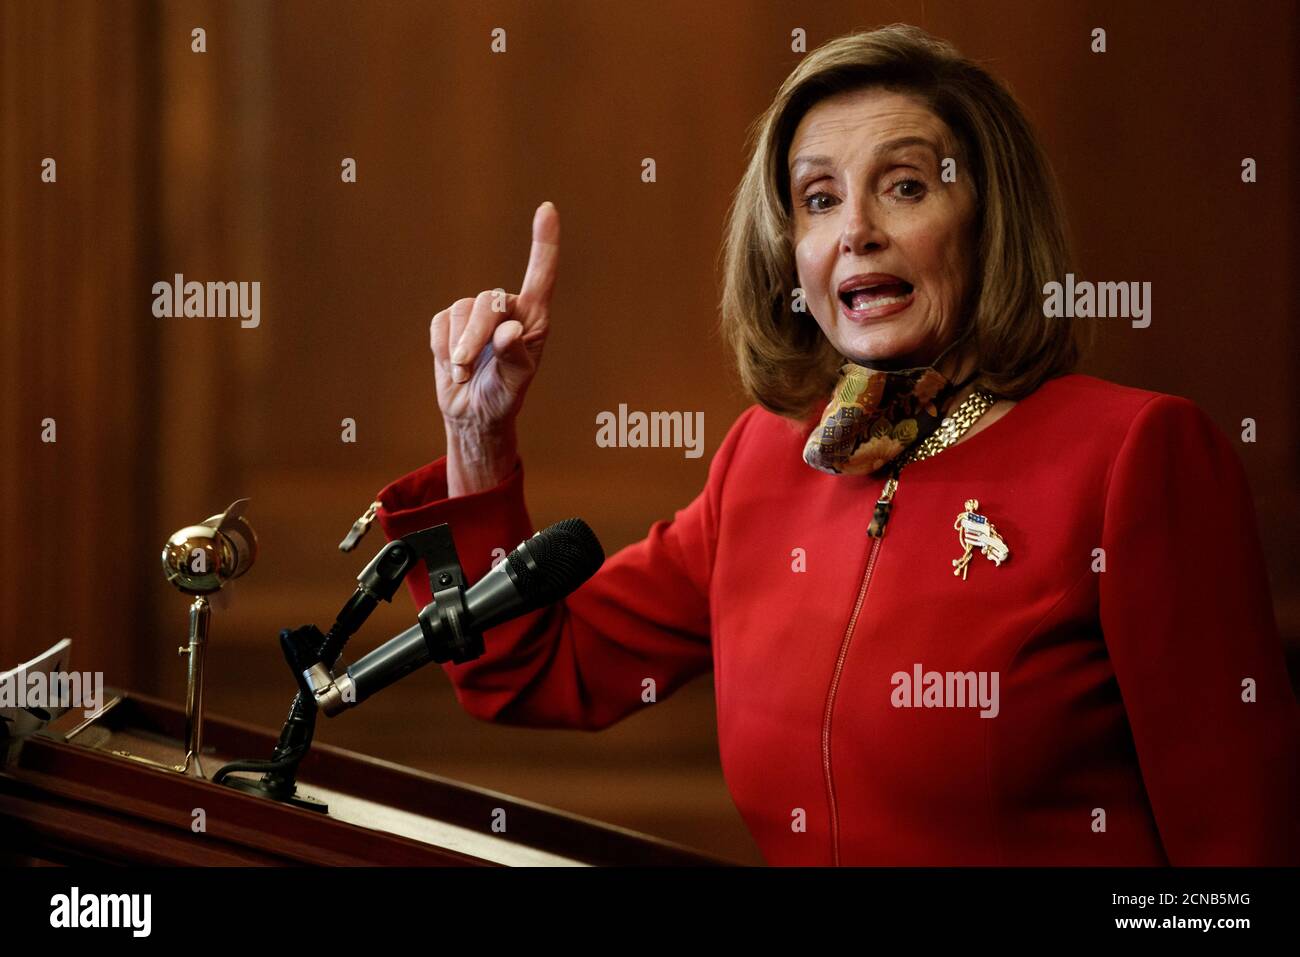 Washington, USA. 18th Sep, 2020. U.S. House Speaker Nancy Pelosi speaks during a press conference on Capitol Hill in Washington, DC, the United States, on Sept. 17, 2020. The U.S. House on Thursday passed a resolution condemning 'all forms of anti-Asian sentiment as related to COVID-19.' Credit: Ting Shen/Xinhua/Alamy Live News Stock Photo